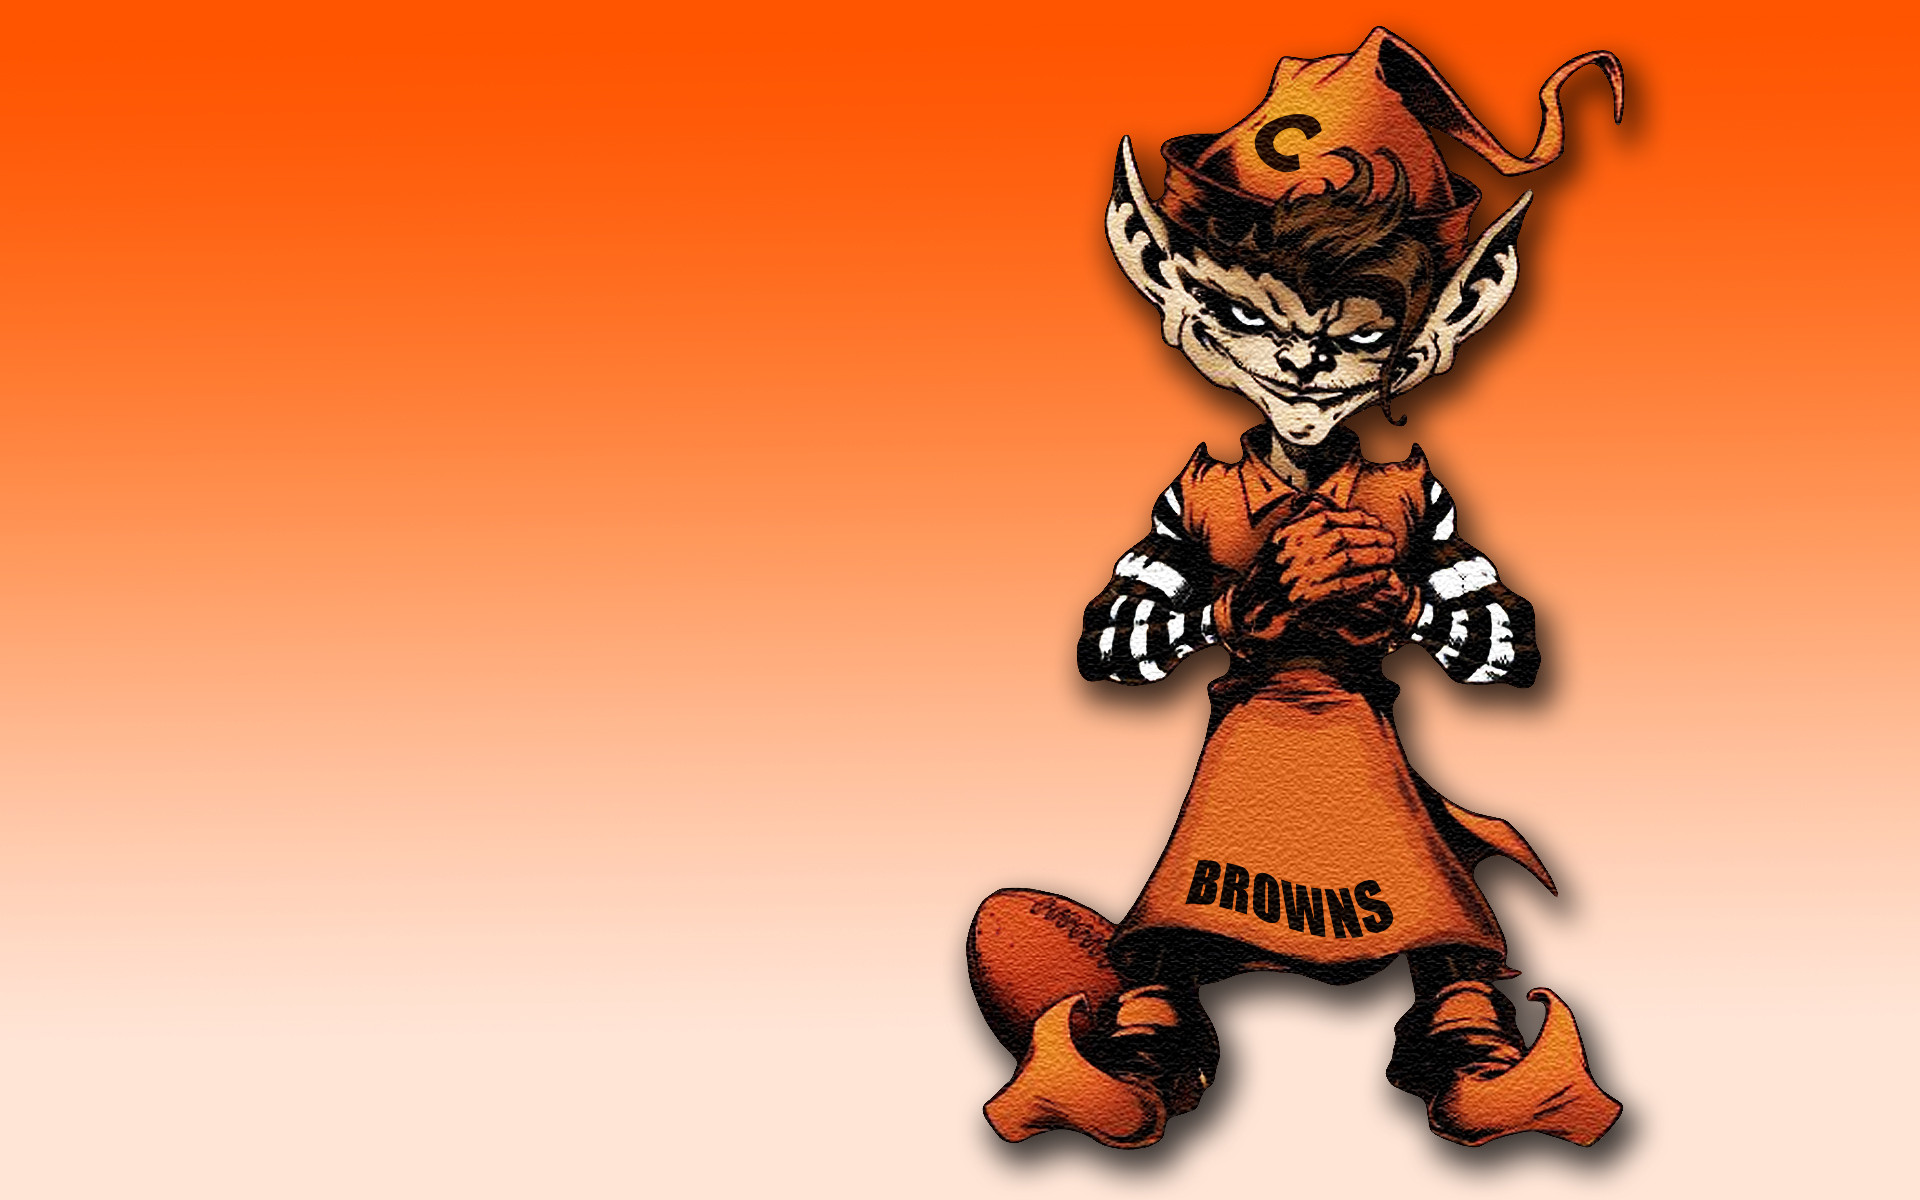 43+] HD Cleveland Browns Wallpaper on